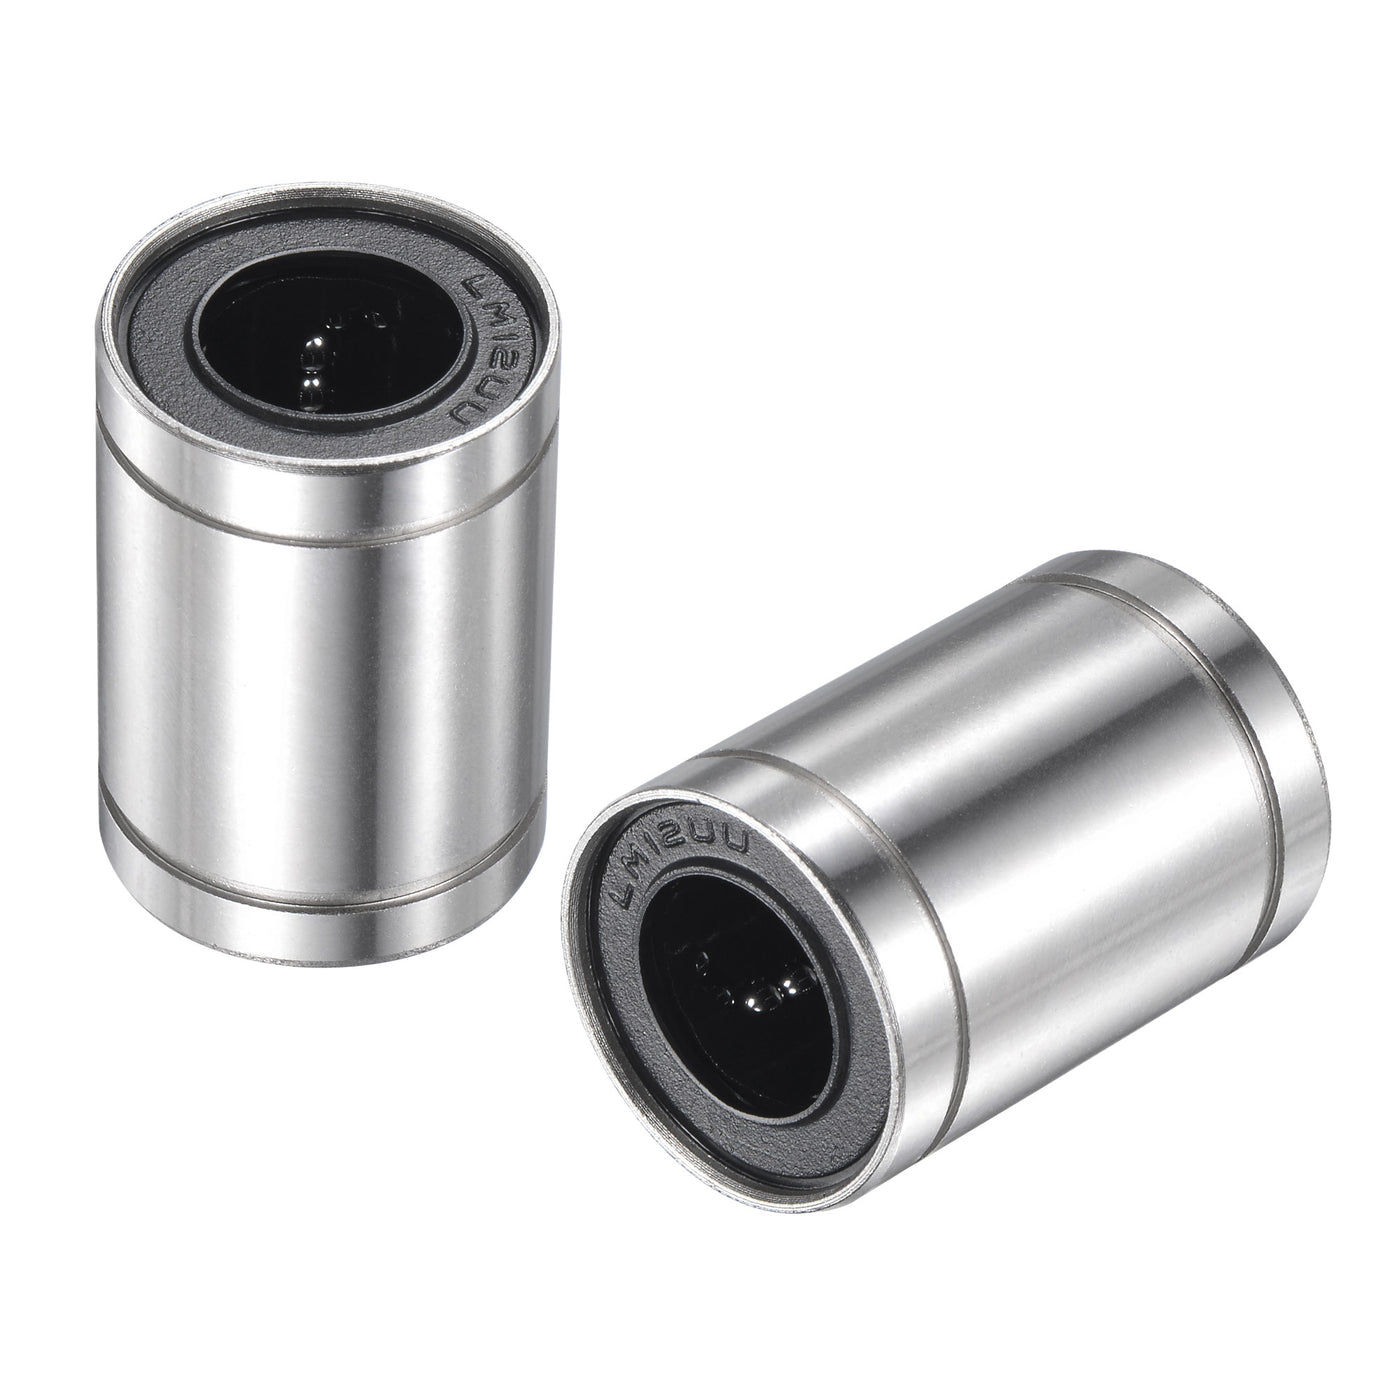 uxcell Uxcell Linear Ball Bearings Nickel Plated for CNC 3D Printer